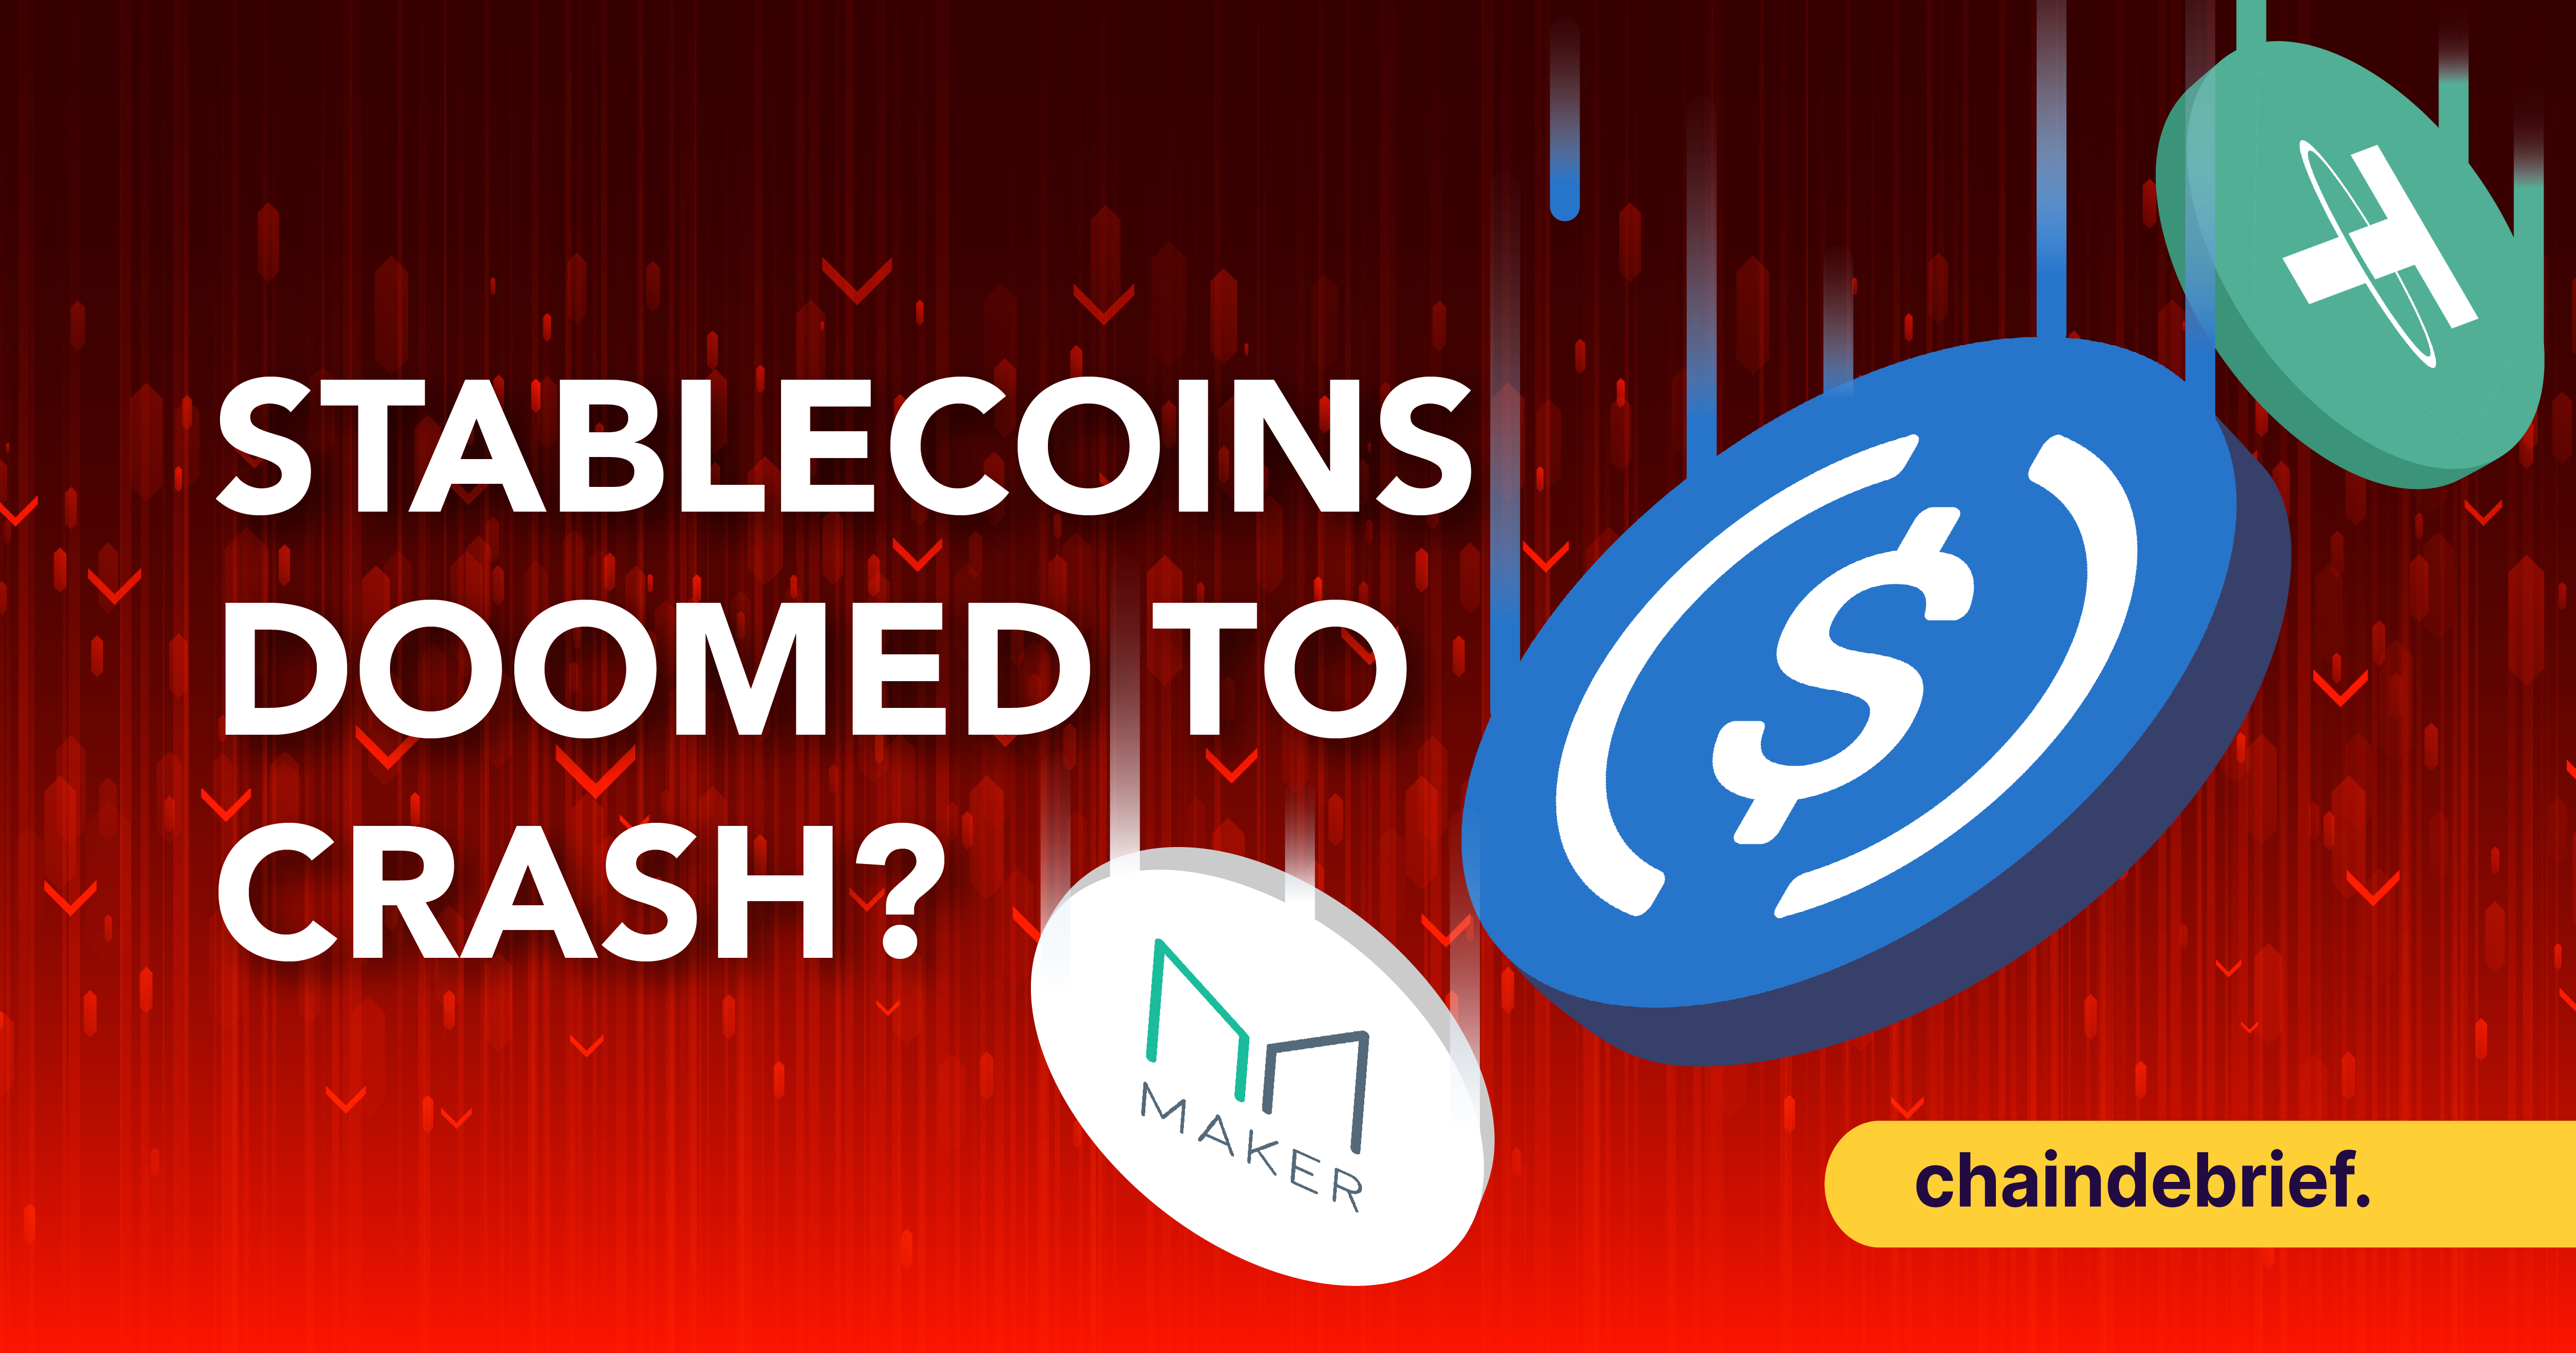 Stablecoins doomed to crash Article Img